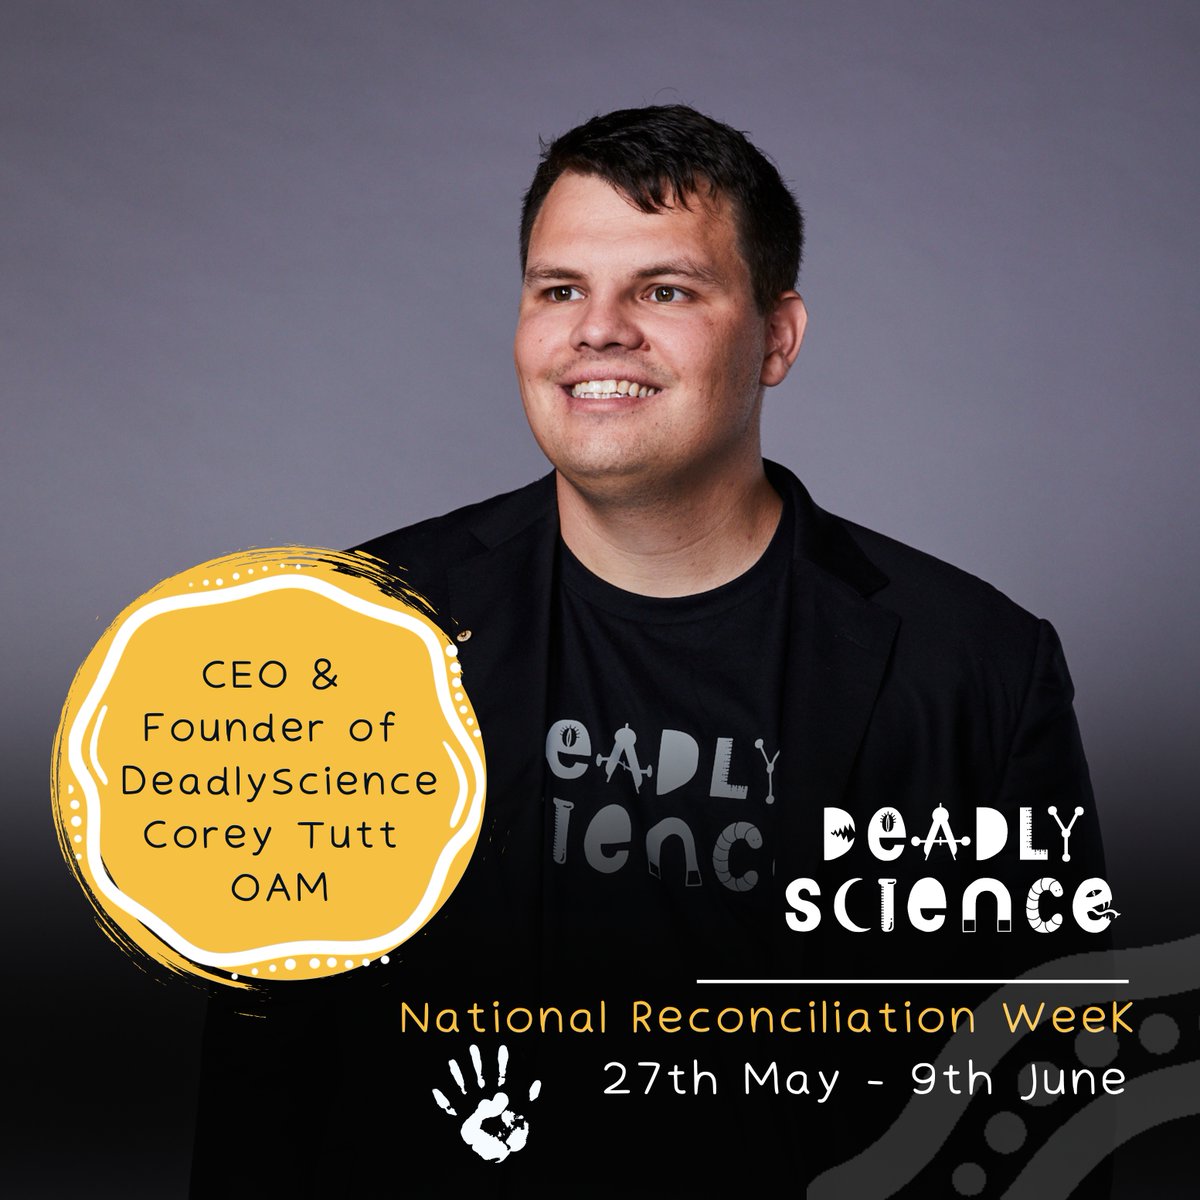 Are you looking for a keynote speaker for your Reconciliation Week event? Reach out now to secure Corey Tutt as your keynote speaker during Reconciliation week. Email admin@deadlyscience.org.au